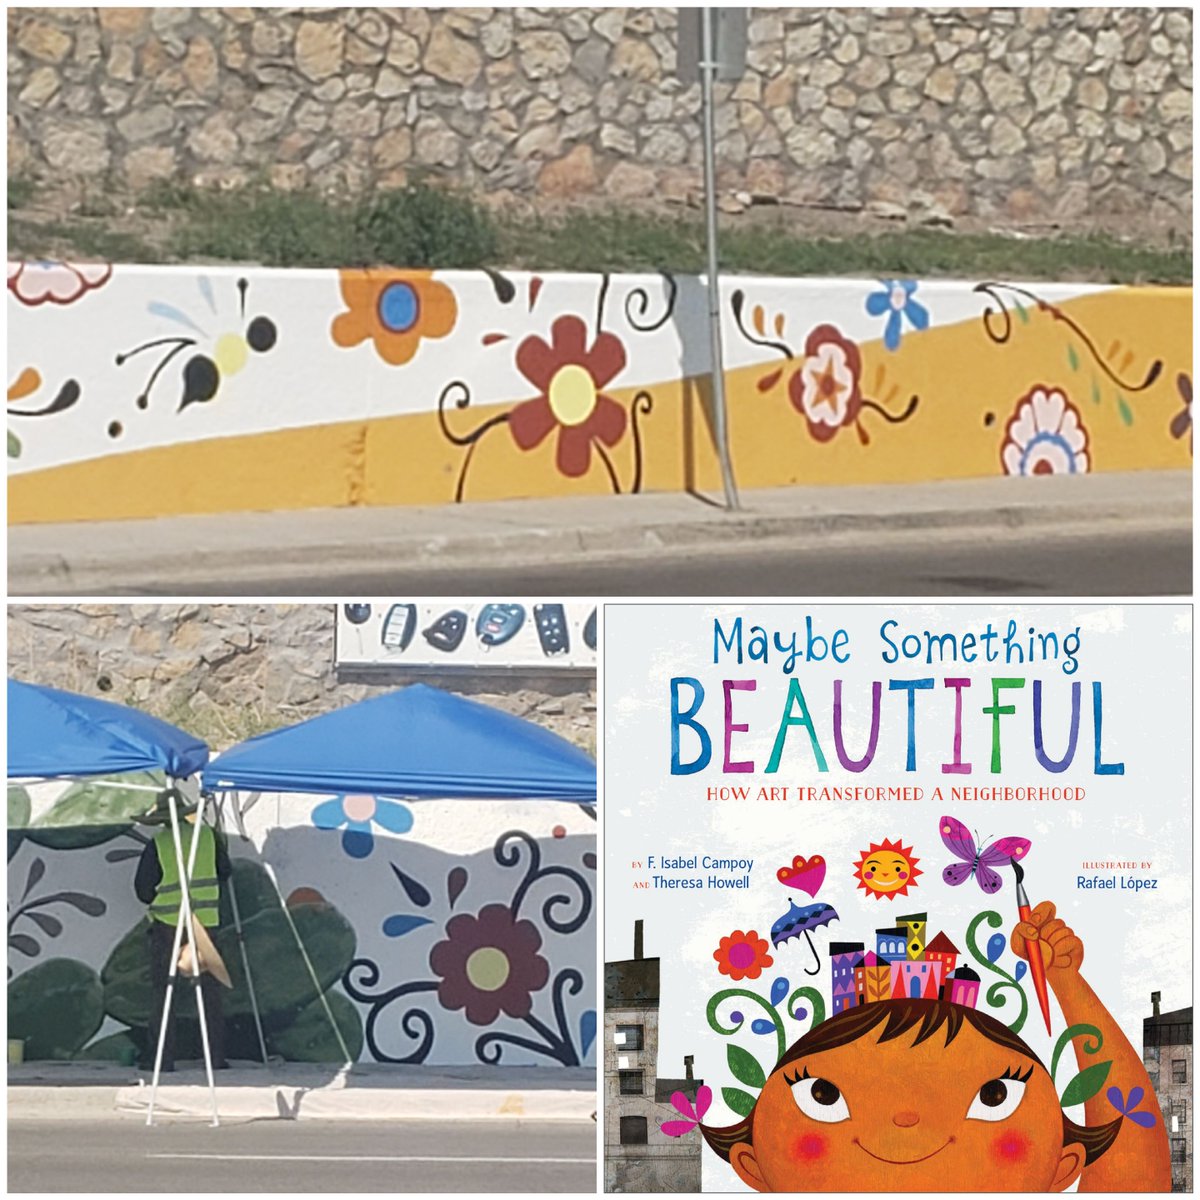 Saw something beautiful today! Spotted this mural going up very reminiscent of the artwork in our book of the month!
#arttransforms
#CTEAlwaysonPoint #SISD_READS